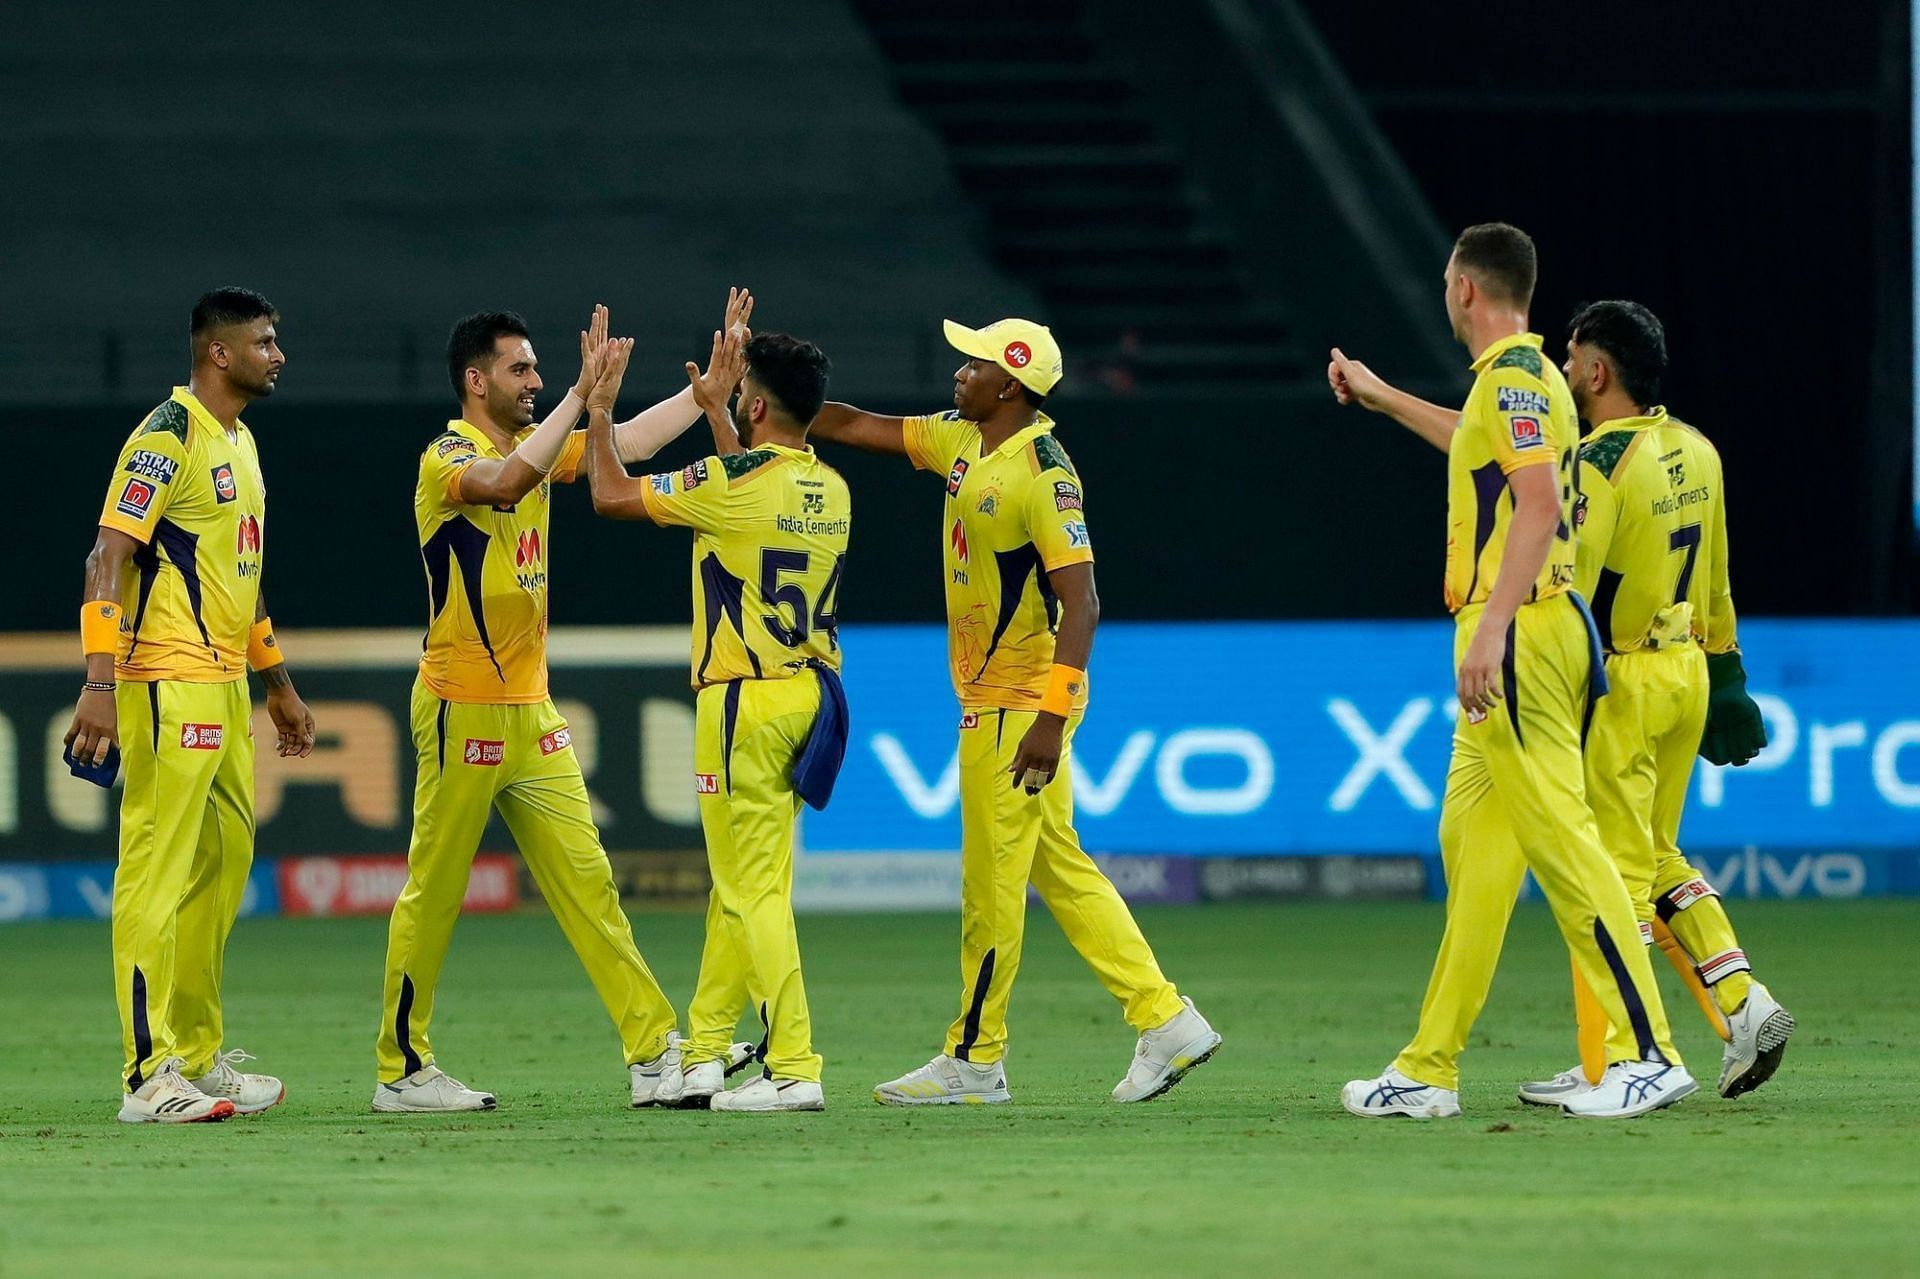 Chennai Super Kings (CSK) celebrate a wicket during IPL 2021. Pic: IPLT20.COM